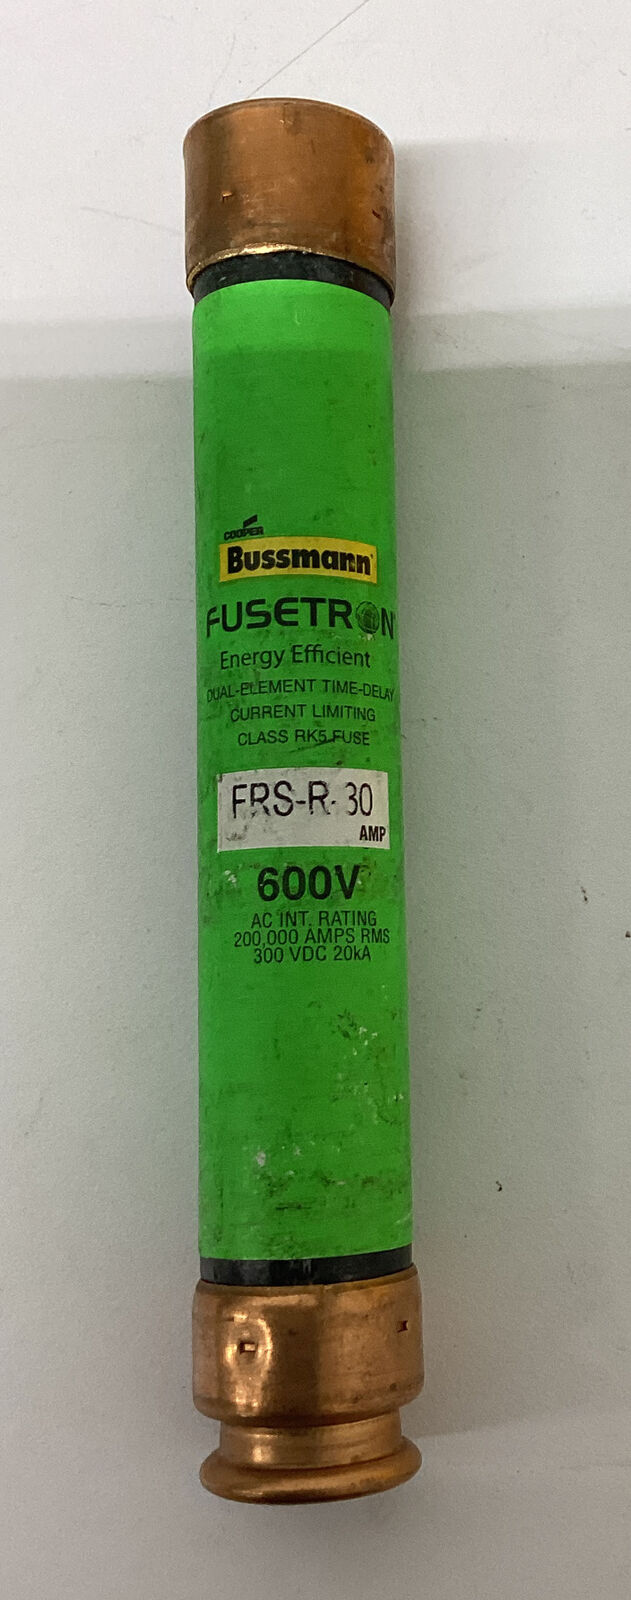 Bussmann Fusetron FRS-S-30 Lot of 3  Class RK5 Fuses (YE250) - 0